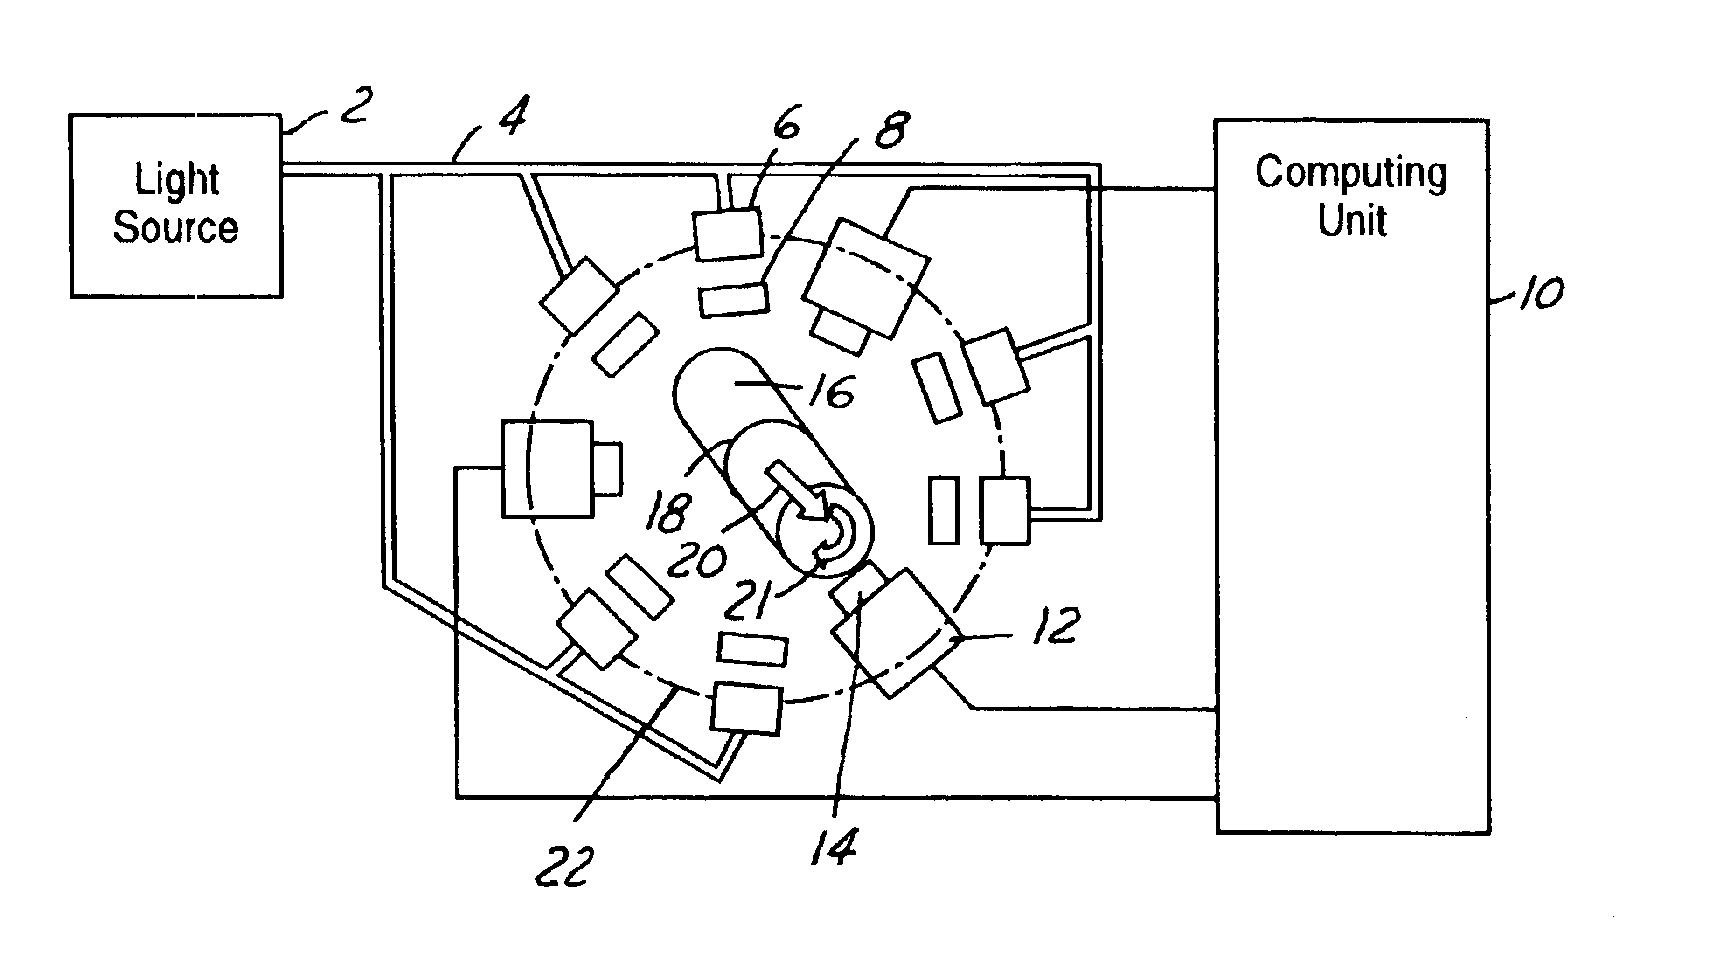 Apparatus and method for detecting surface defects on a workpiece such as a rolled/drawn metal bar